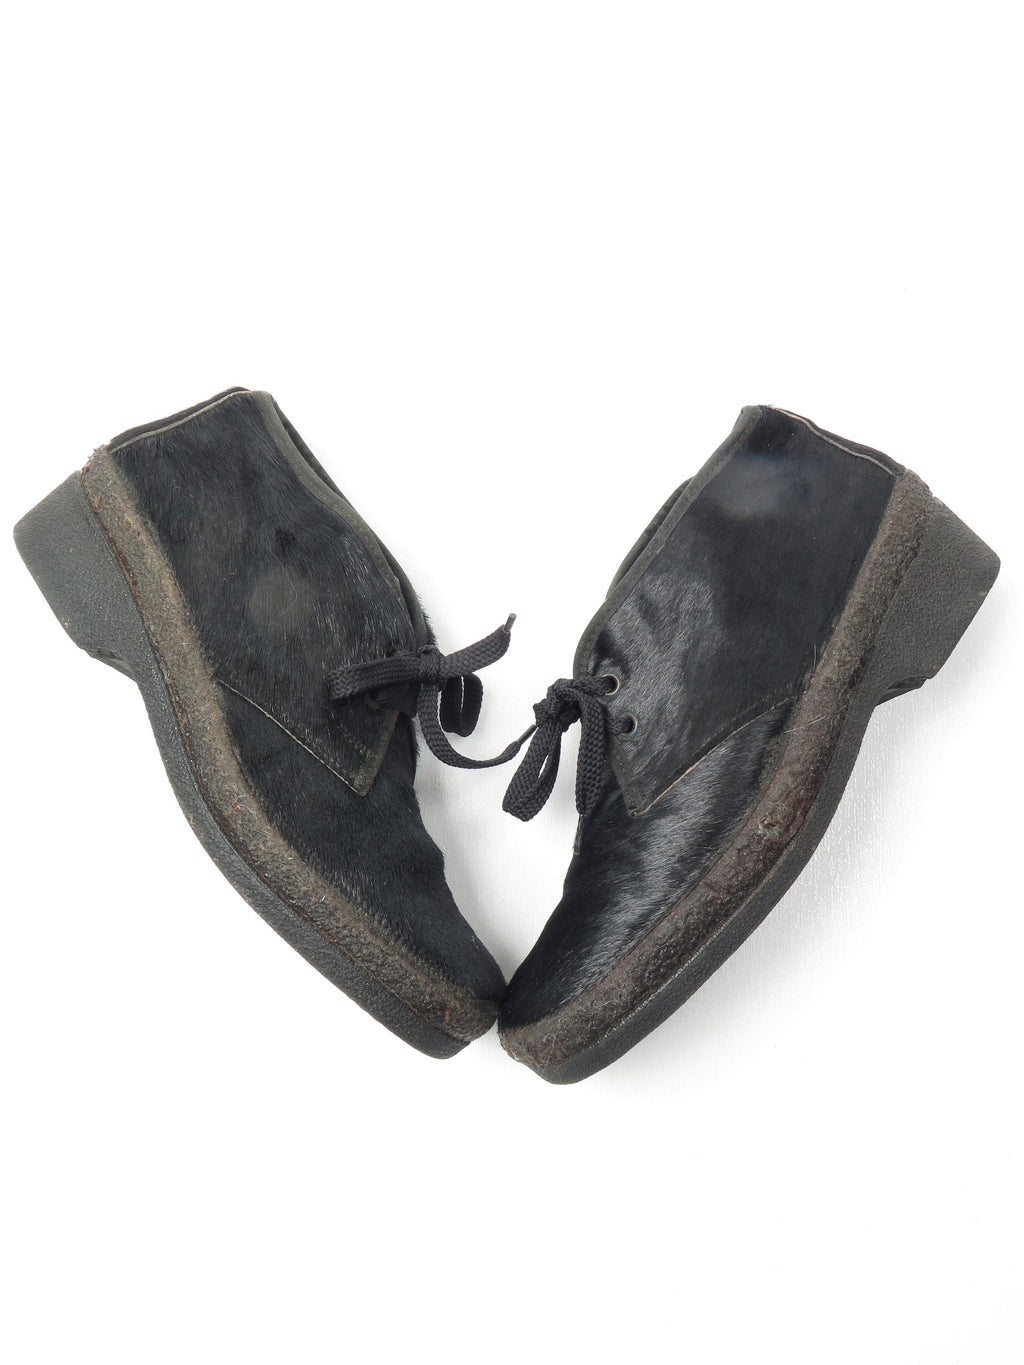 Black Cowhide Desert Style Shoes/Boots 5/38 - The Harlequin